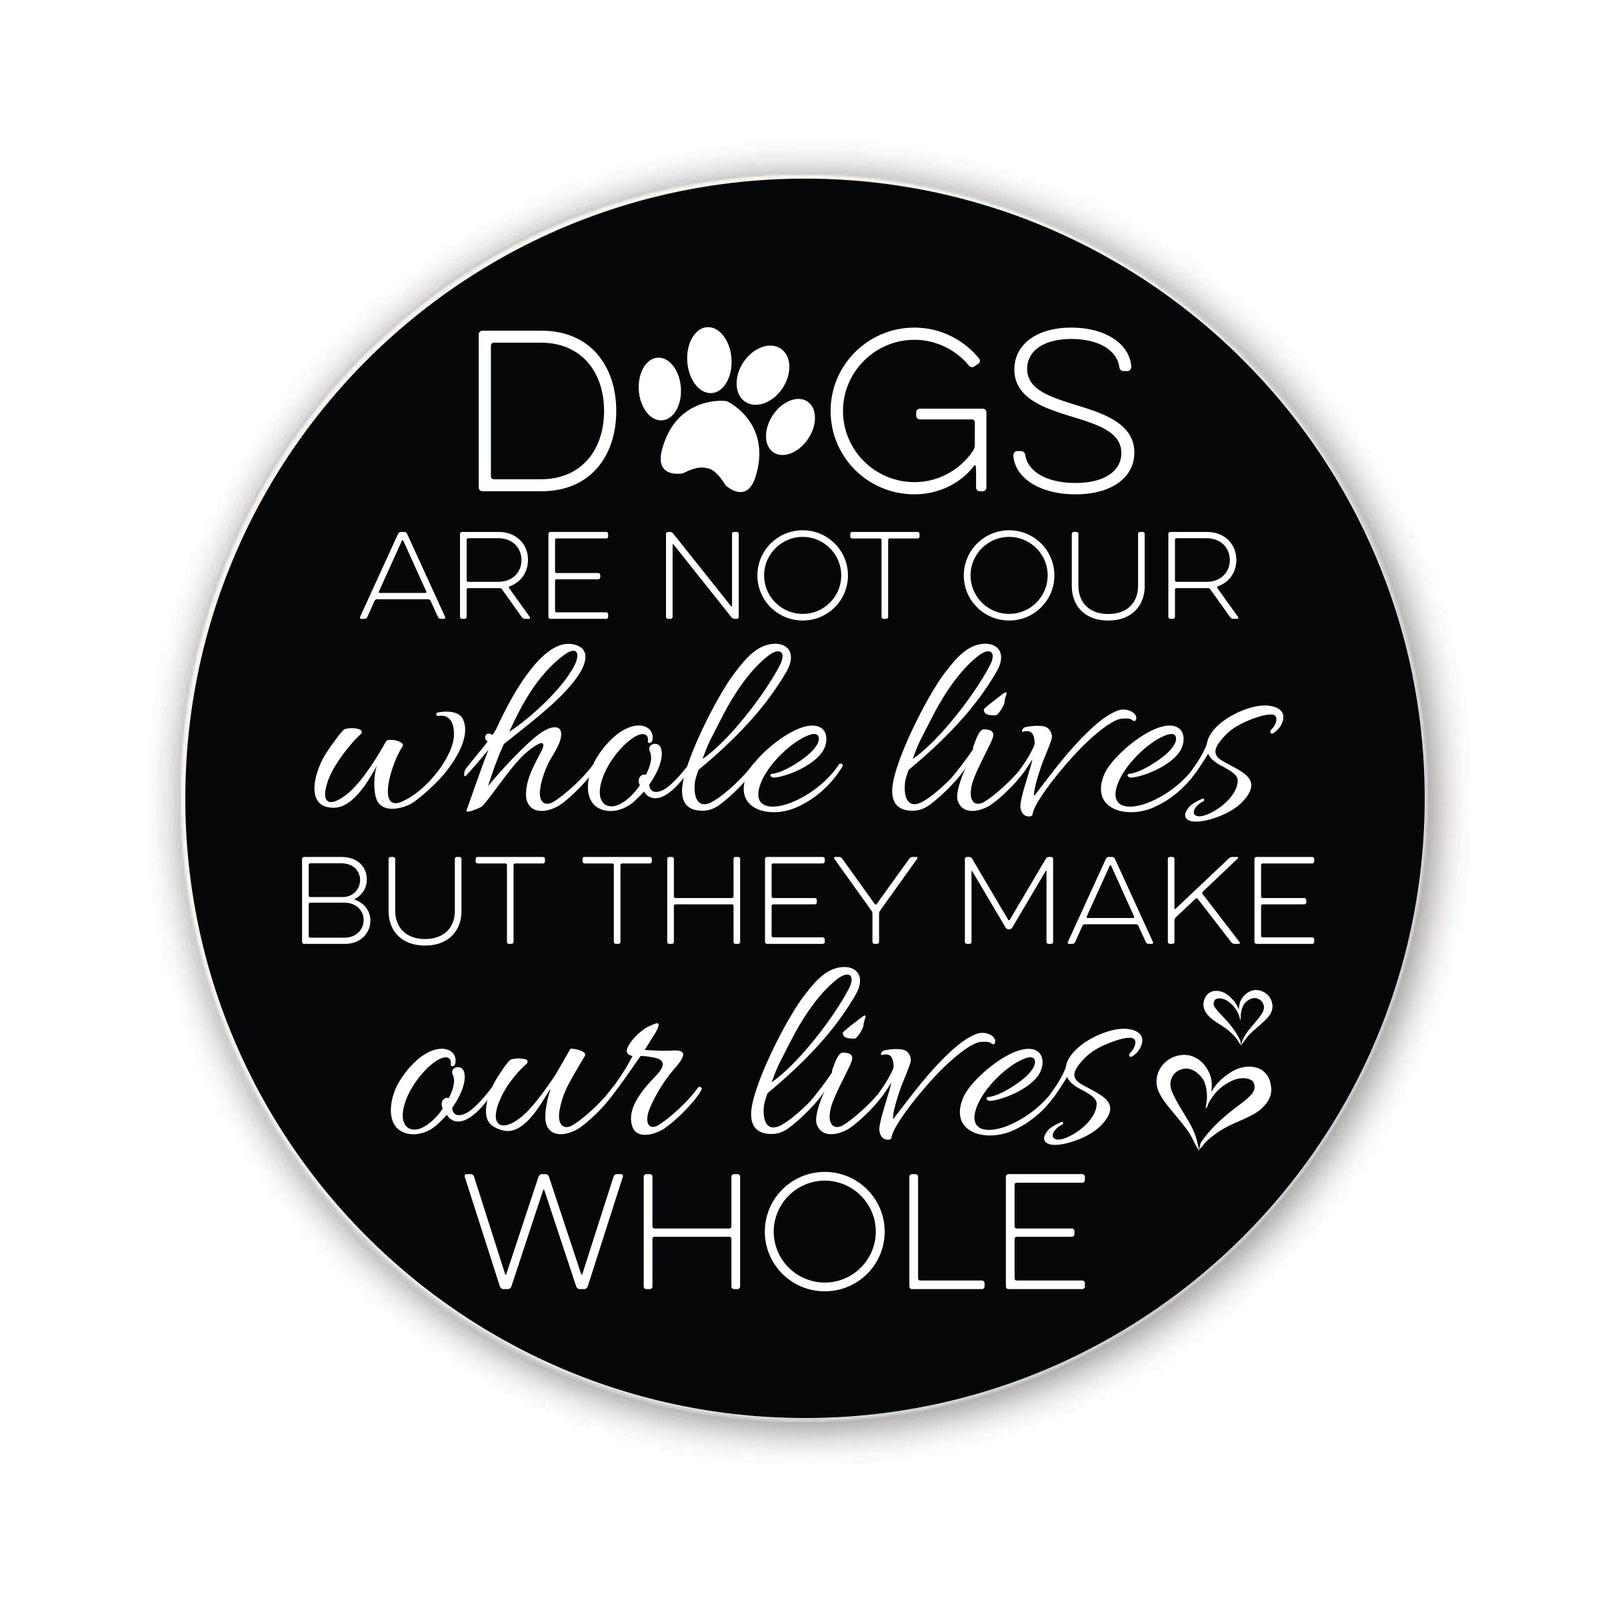 Refrigerator Magnet Perfect Gift Idea For Pet Owners - Dogs Leave Pawprints